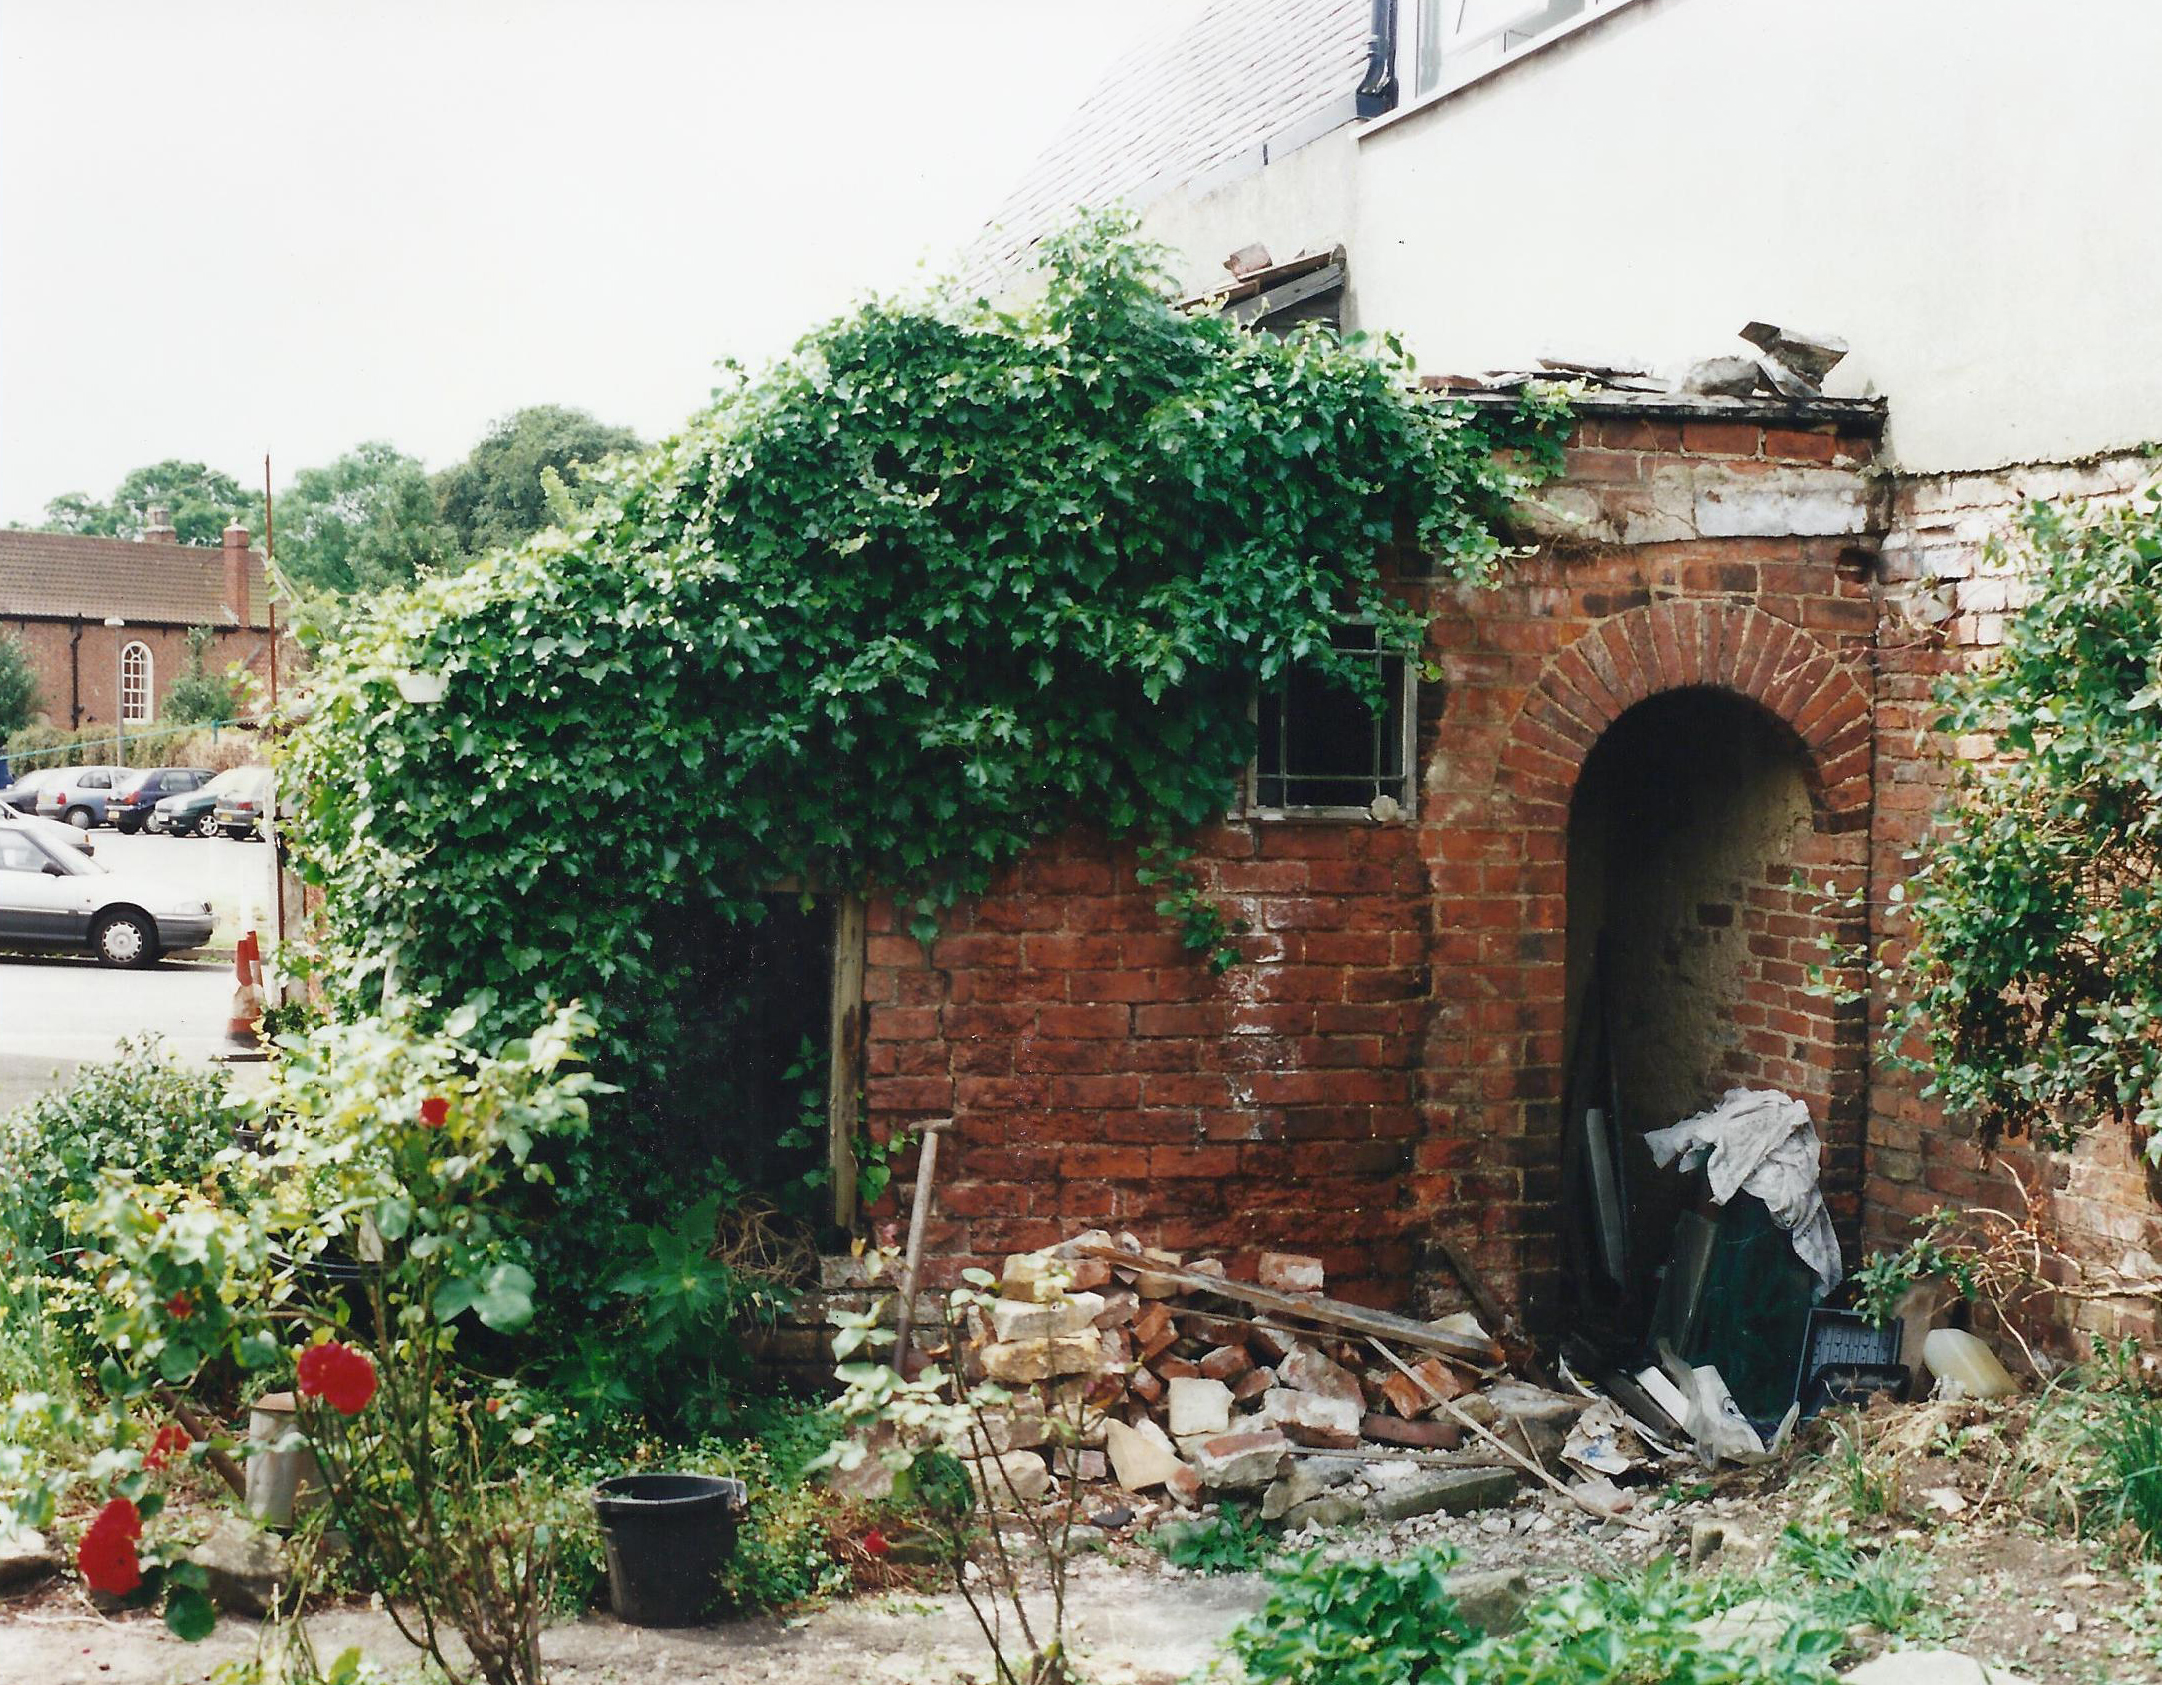 The Site in Disrepair - Old Dairy - Hedon Architects - Samuel Kendall Associates